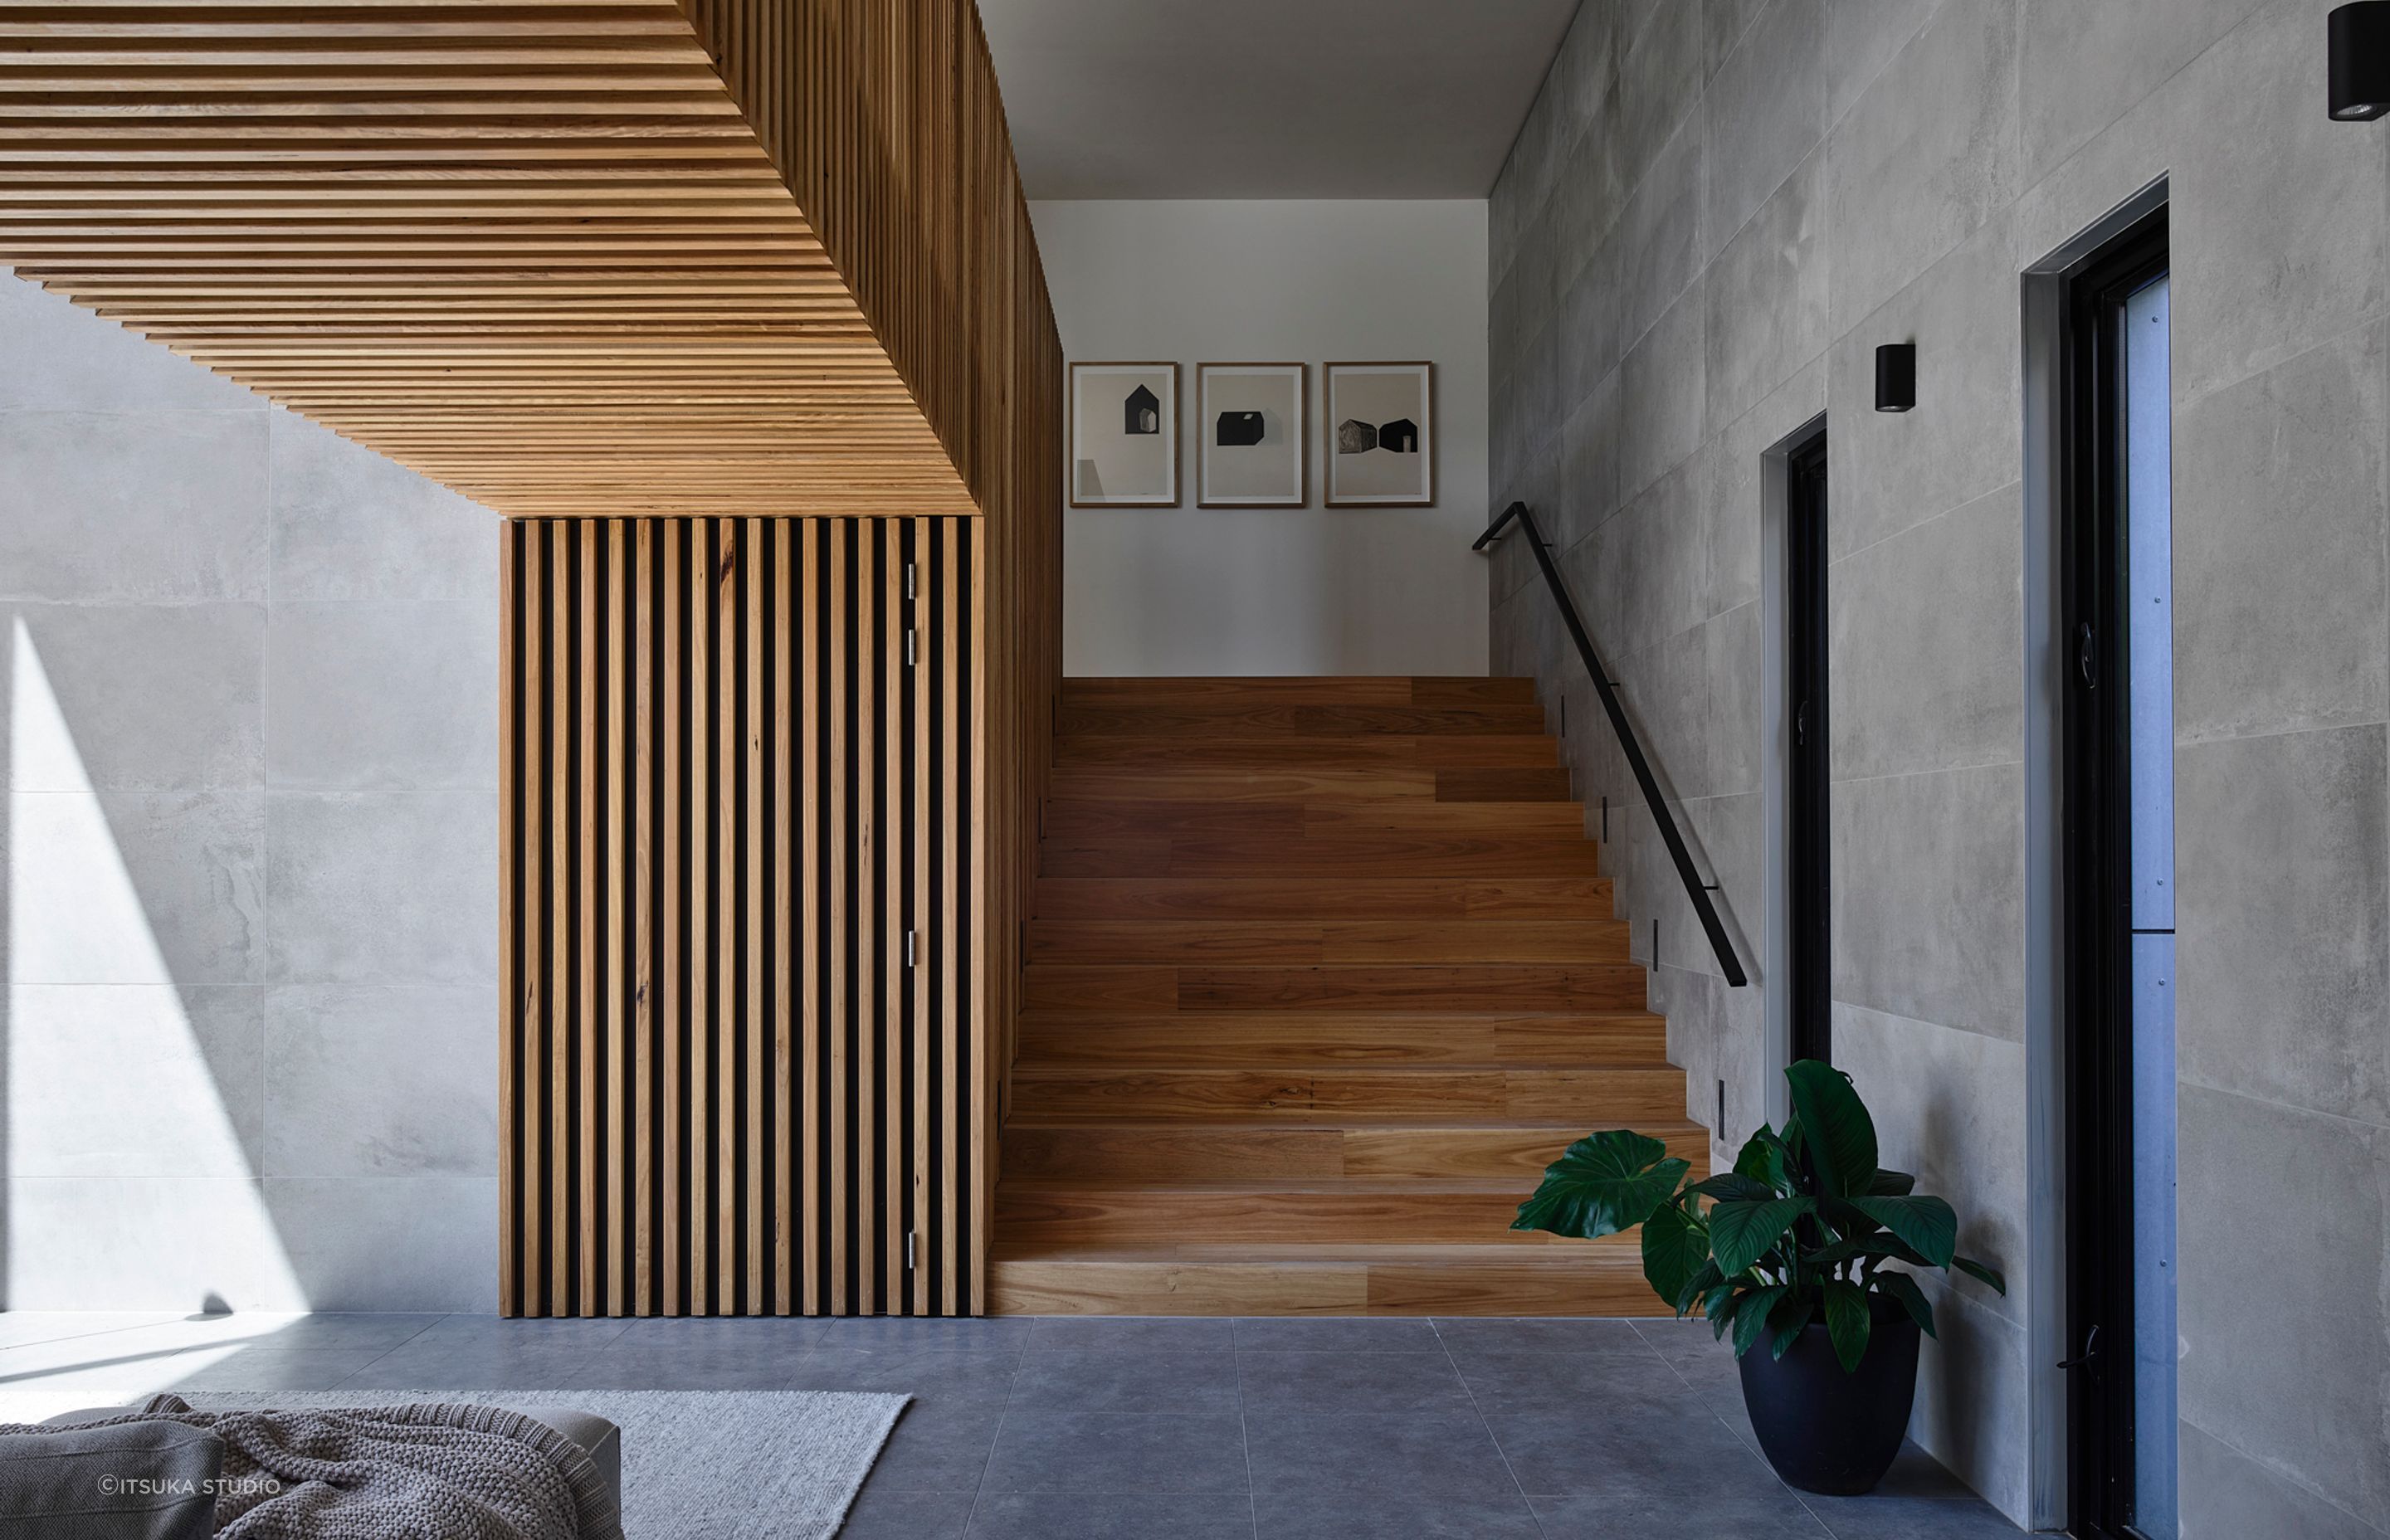 A neutral palette has been used for the home's interior. The wide timber staircase leads to the client's study nook.